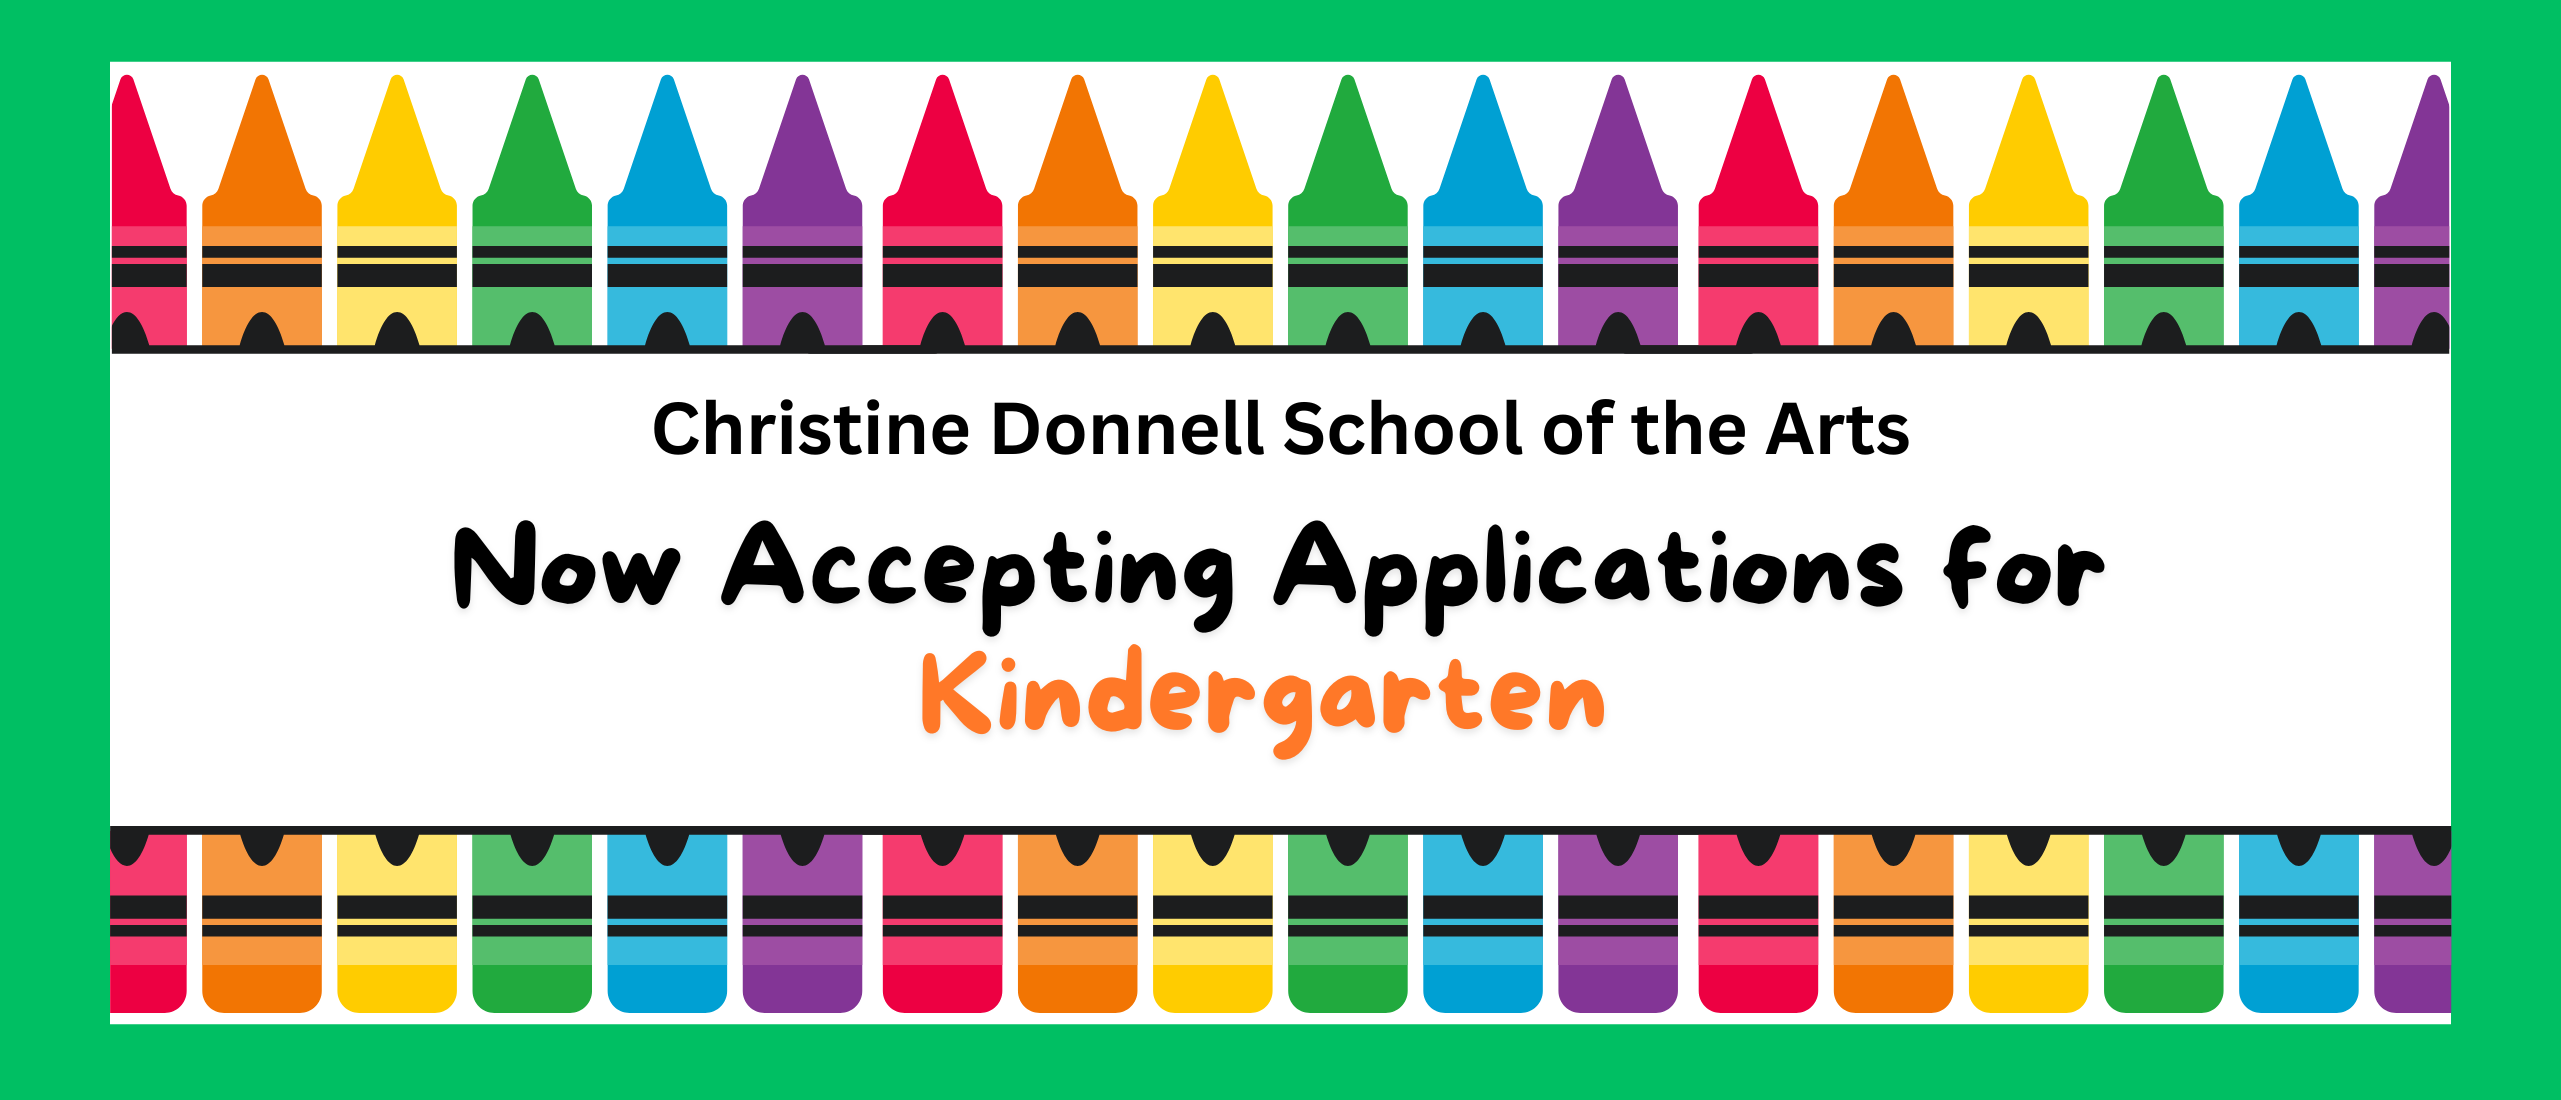 Now Accepting Applications for Kindergarten